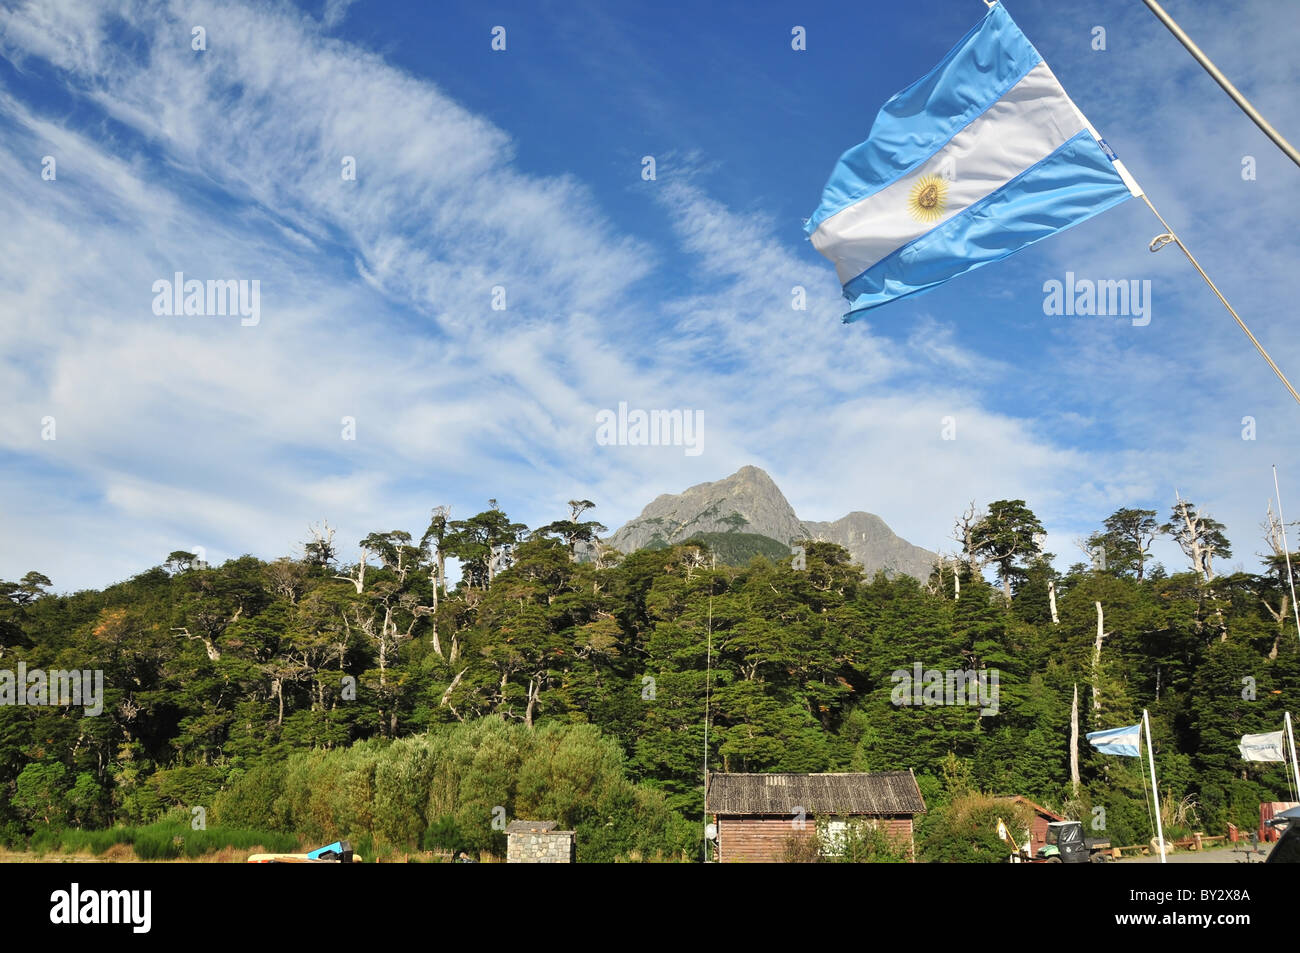 Blue sky, green mountain view of Argentinian Flag flying from the mast of a catamaran moored at Puerto Blest, Andes, Argentina Stock Photo